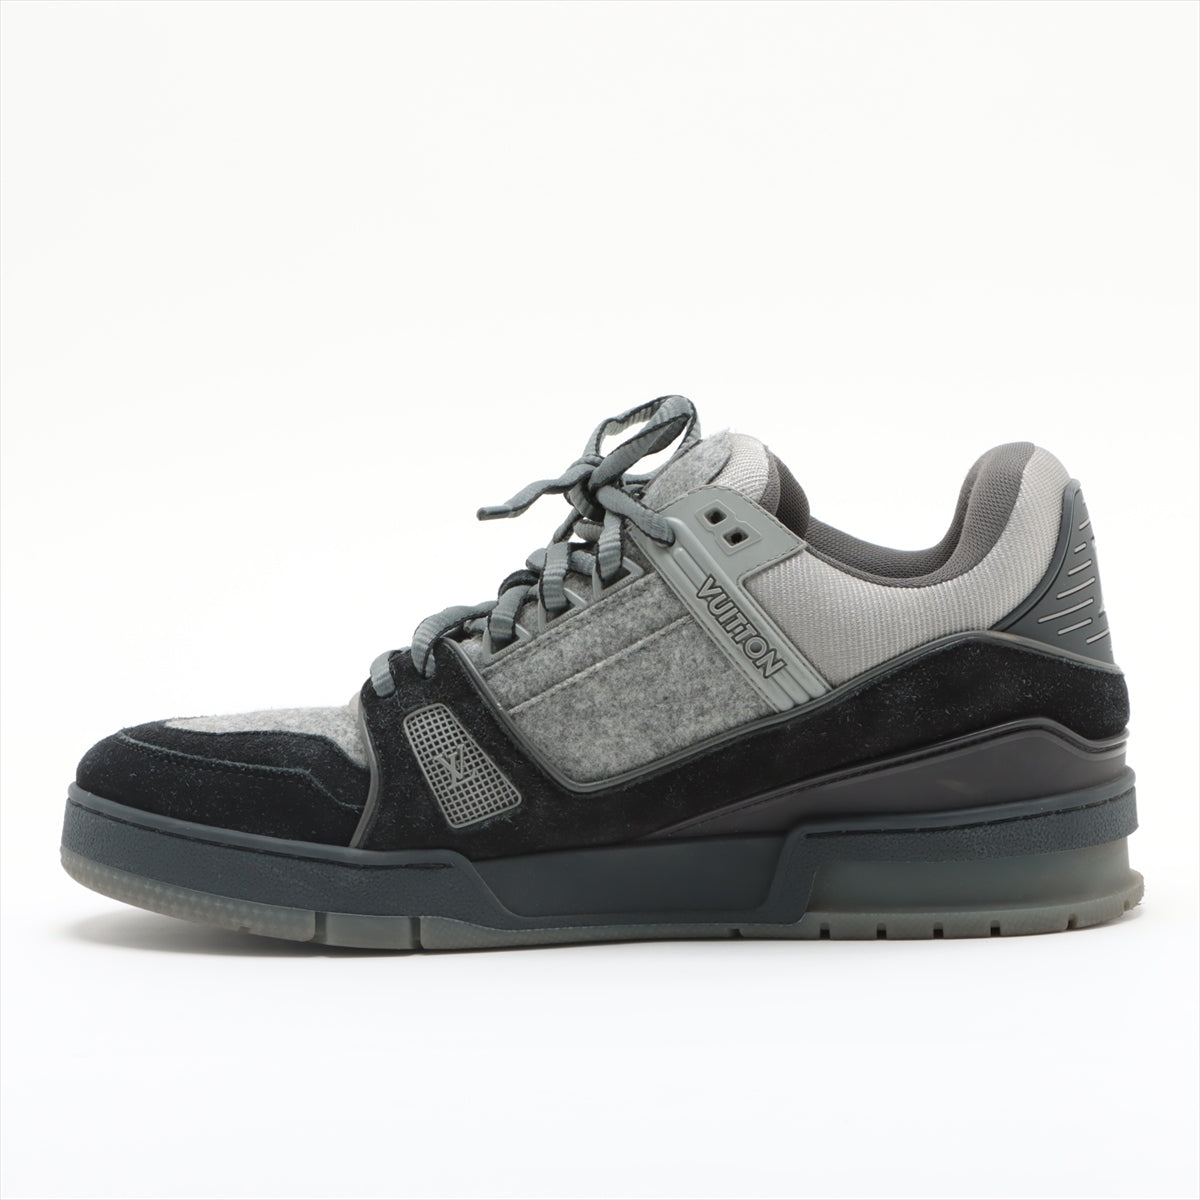 Louis Vuitton LV Trainer Line 19-year Wool Sneakers 7 1/2 Men's Grey NV0169 Switch suede Is there a replacement string